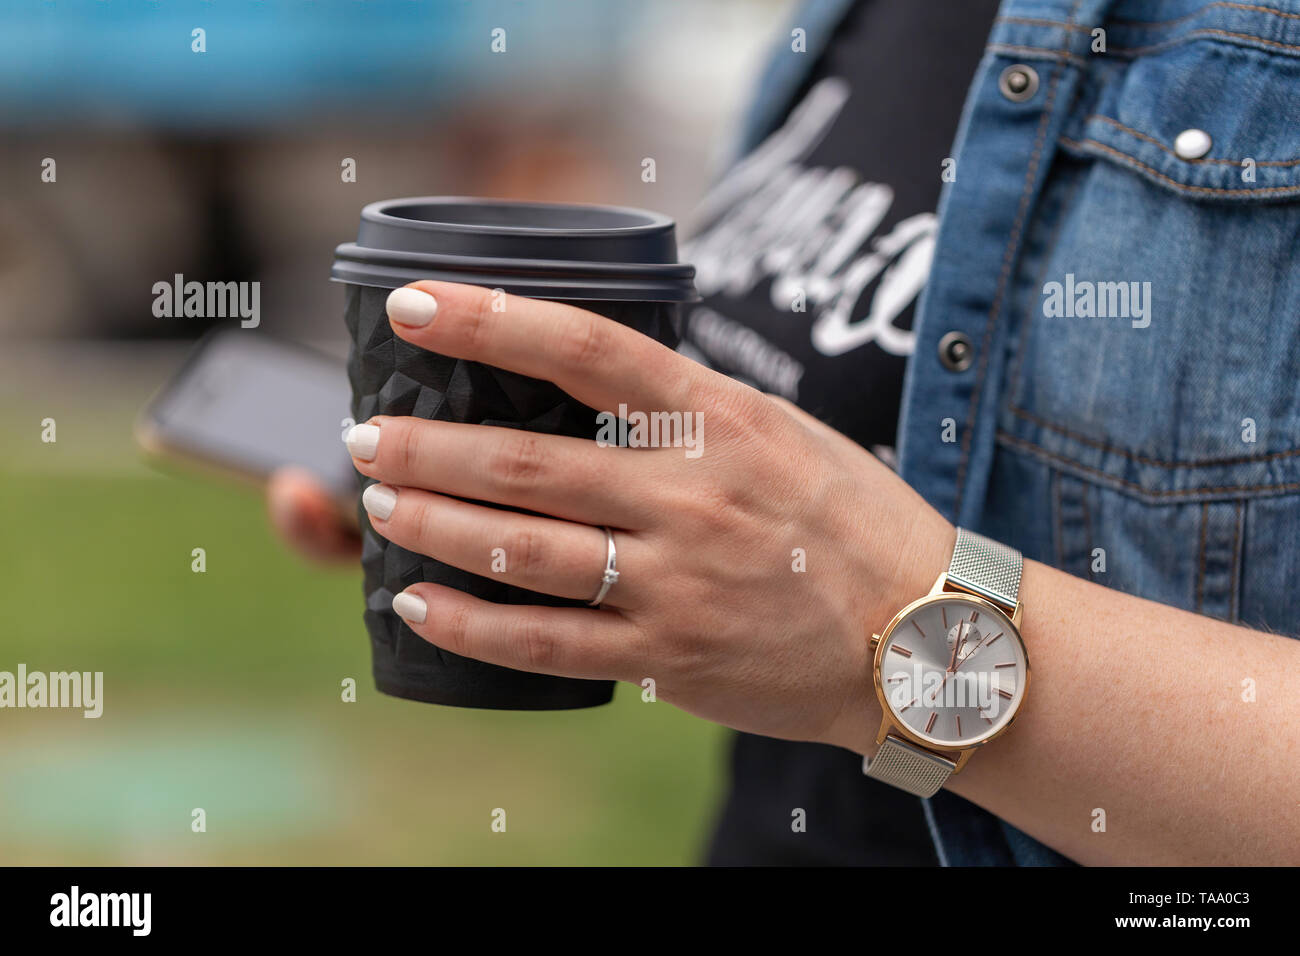 Close up of women's hands holding smartphone and a cup of coffee. A woman is dressed in a blue denim jacket, a black T-shirt and a watch on her arm Stock Photo